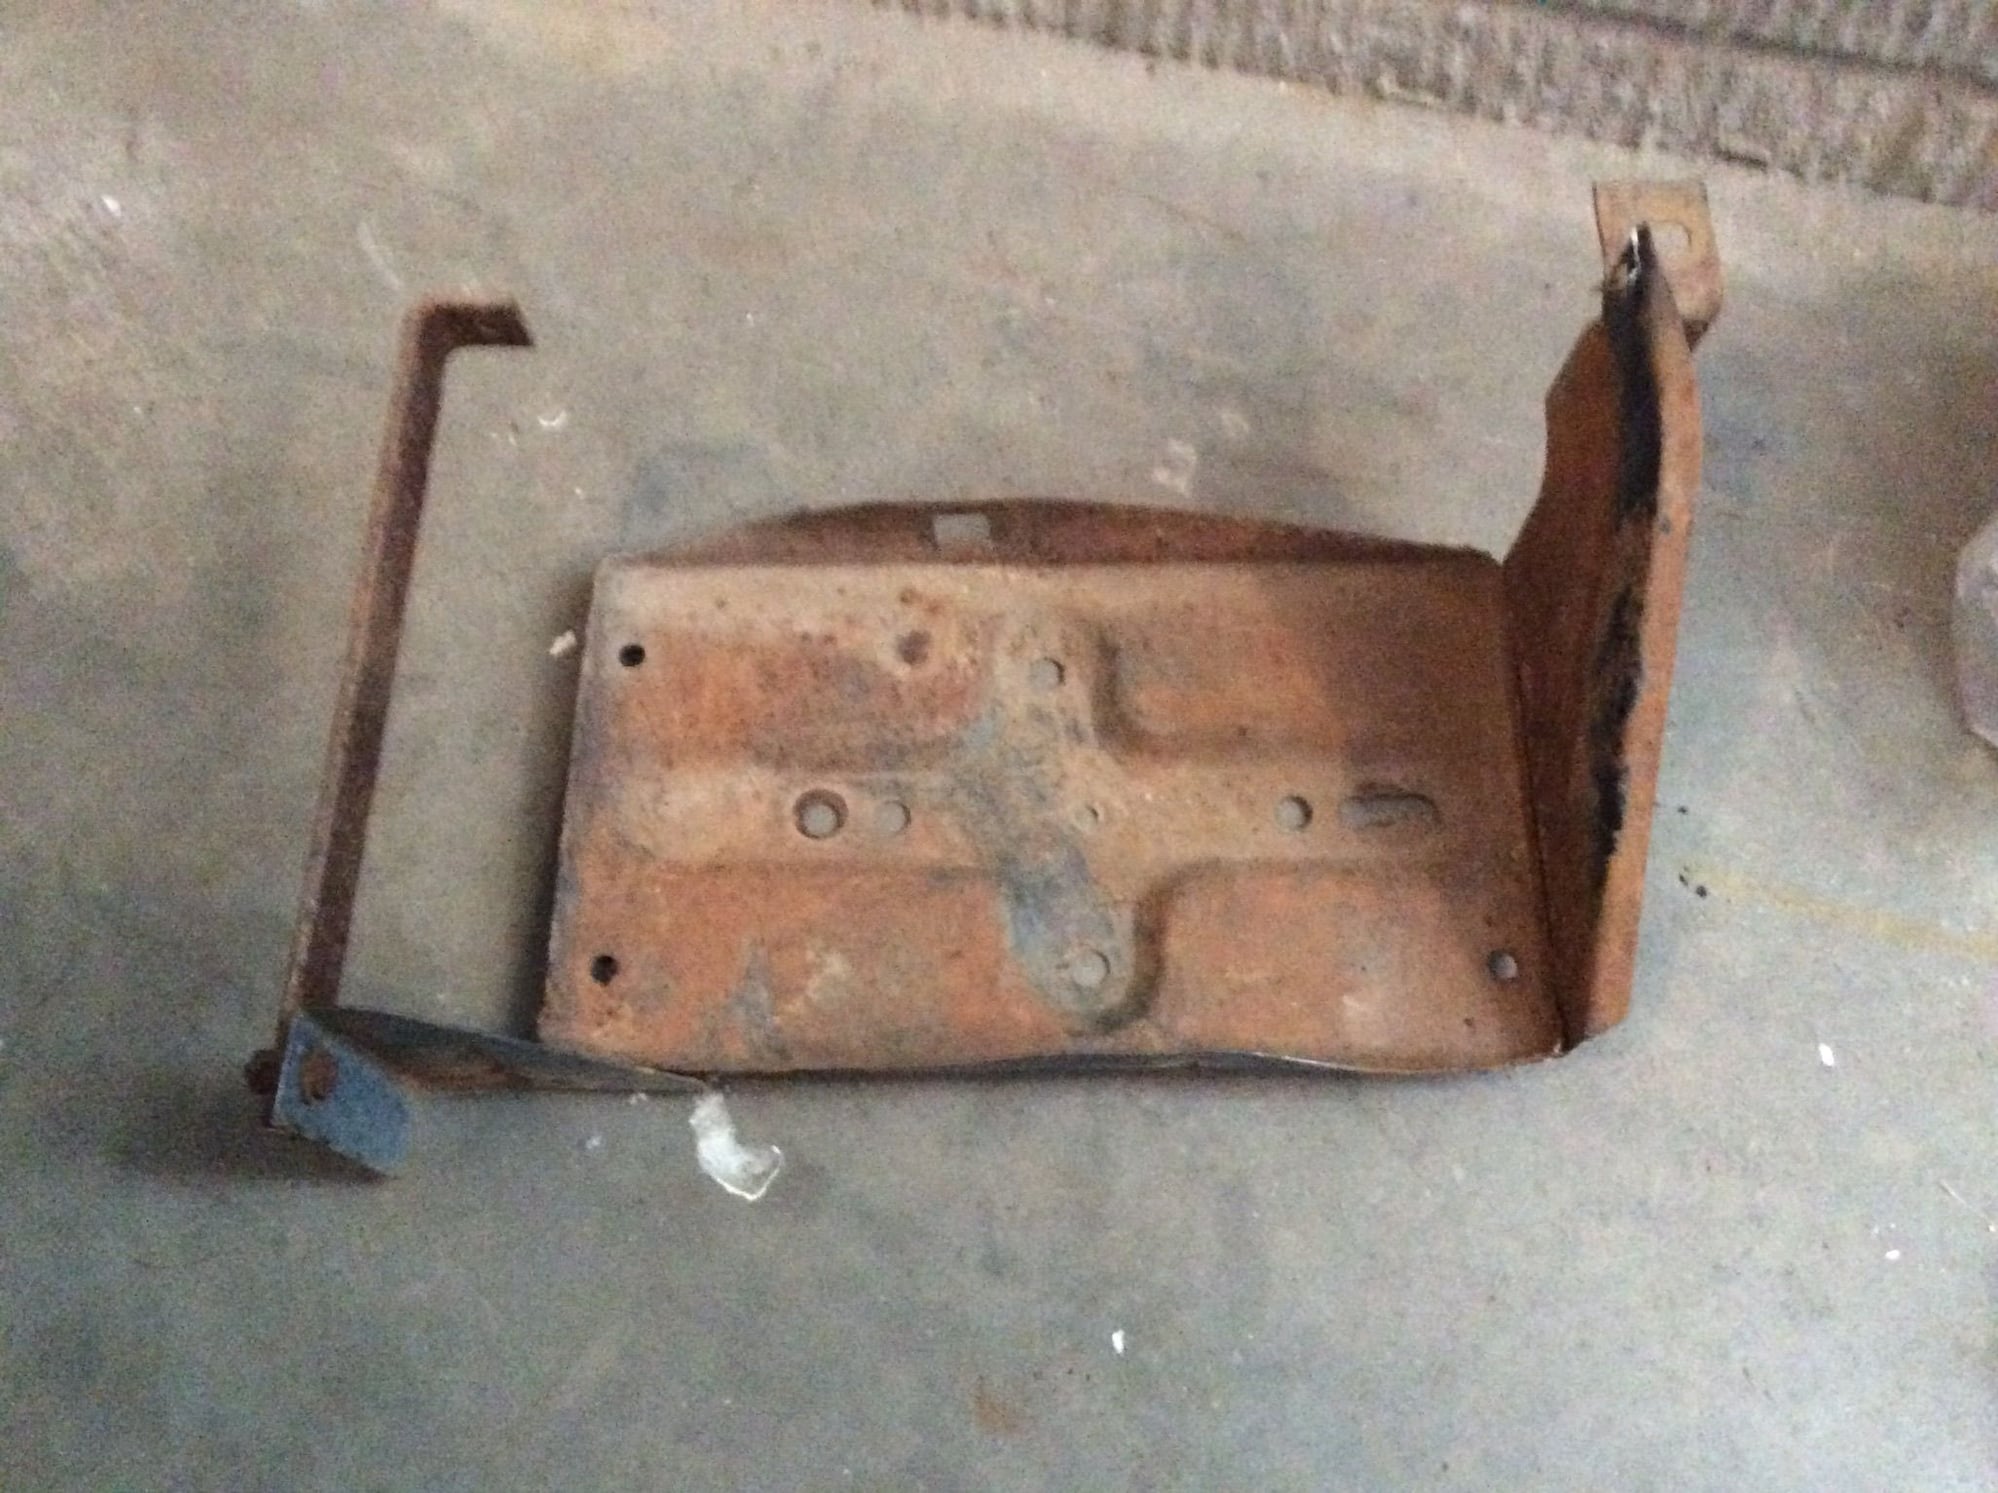 Engine - Electrical - Auxiliary battery tray - Used - 1973 to 1979 Ford F Series - Sioux Falls, SD 57108, United States